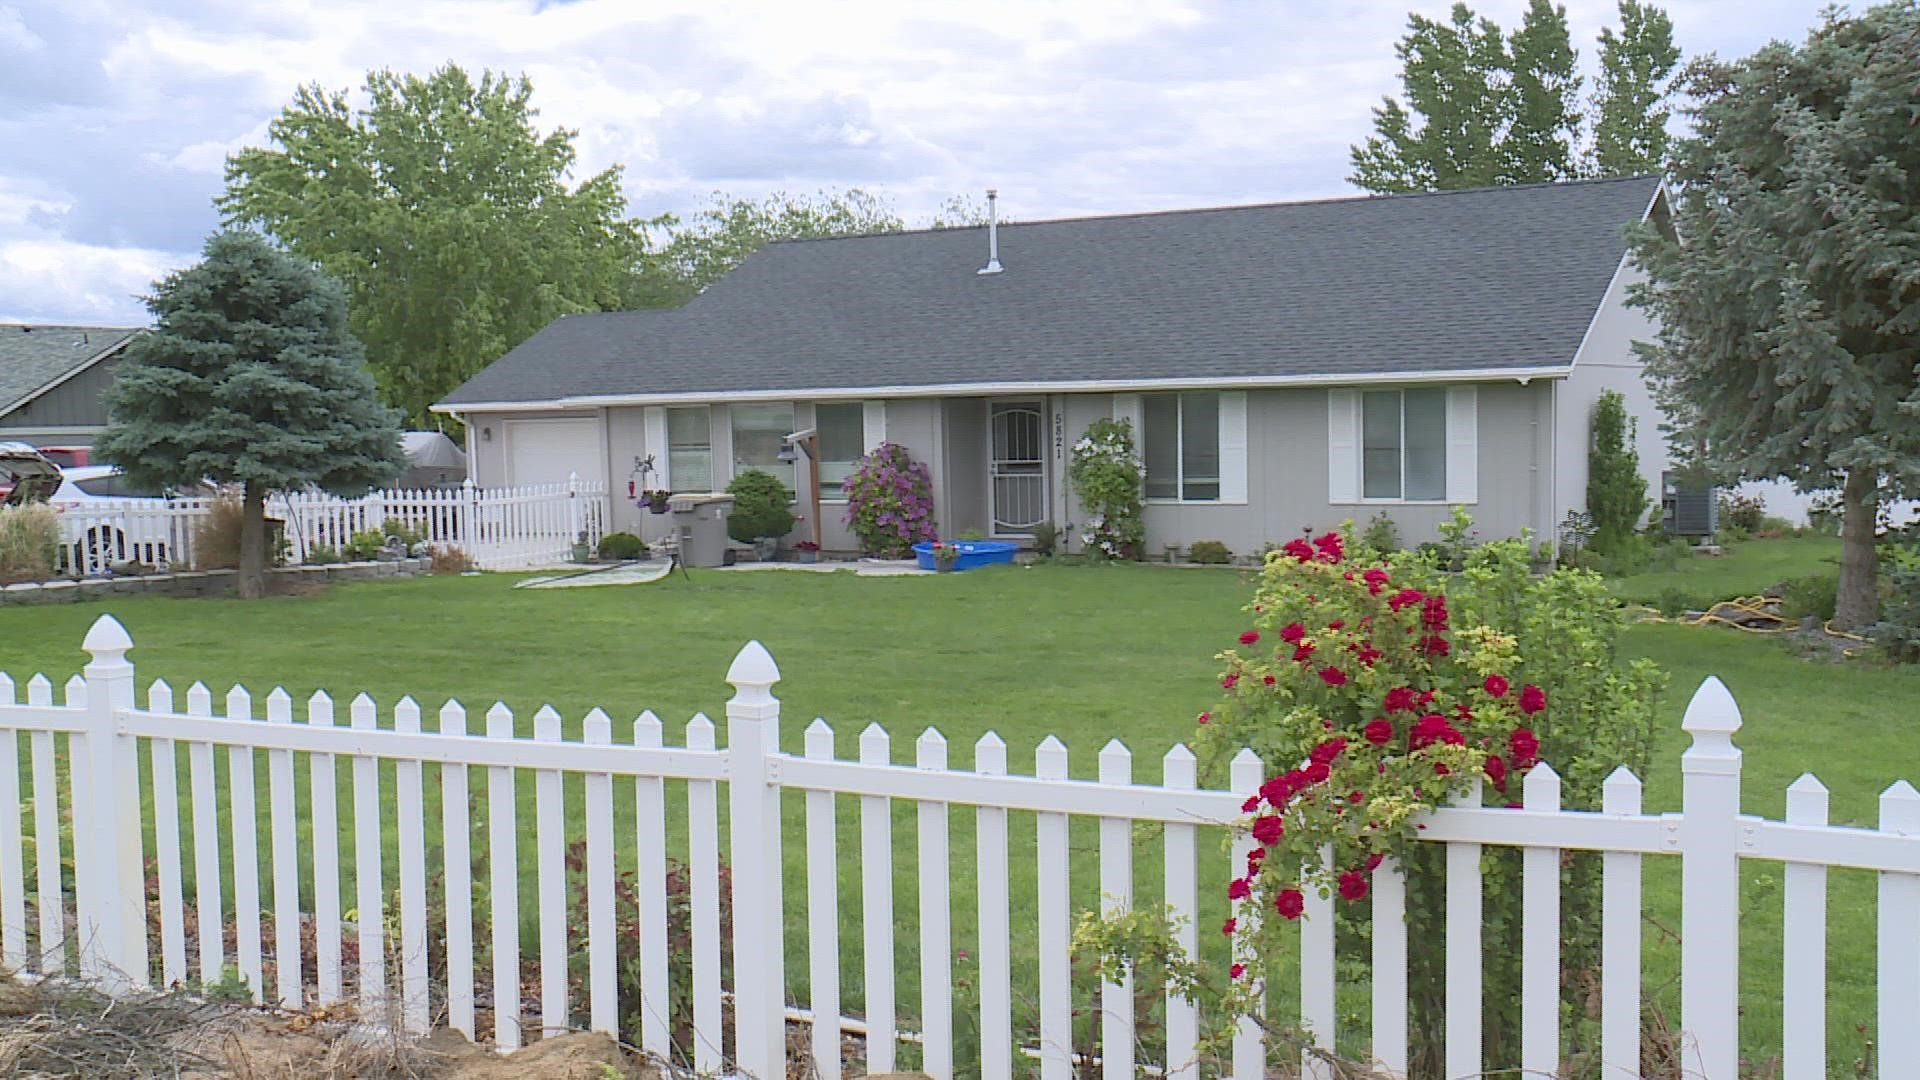 A property's value plays a large role in what the owner pays in property taxes; however, it's not the only factor, according to the Canyon County Assessor's Office.